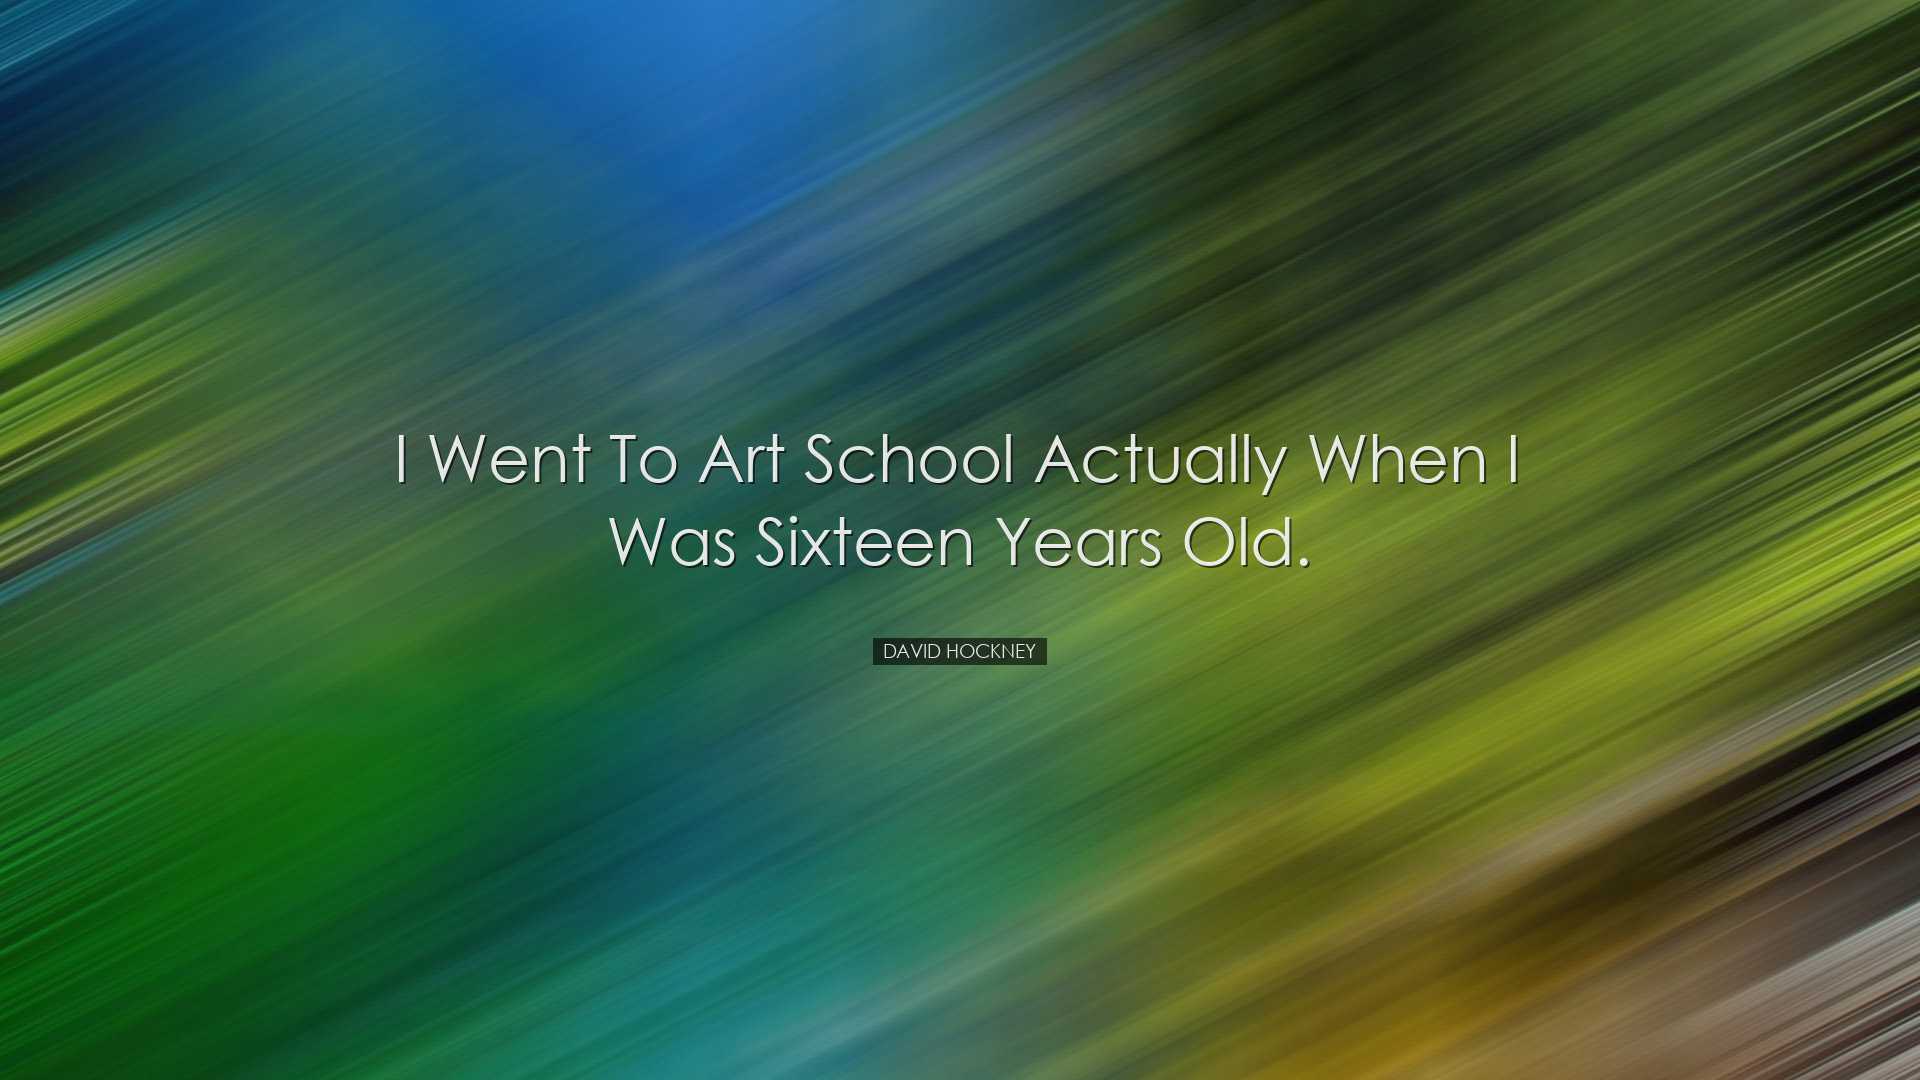 I went to art school actually when I was sixteen years old. - Davi